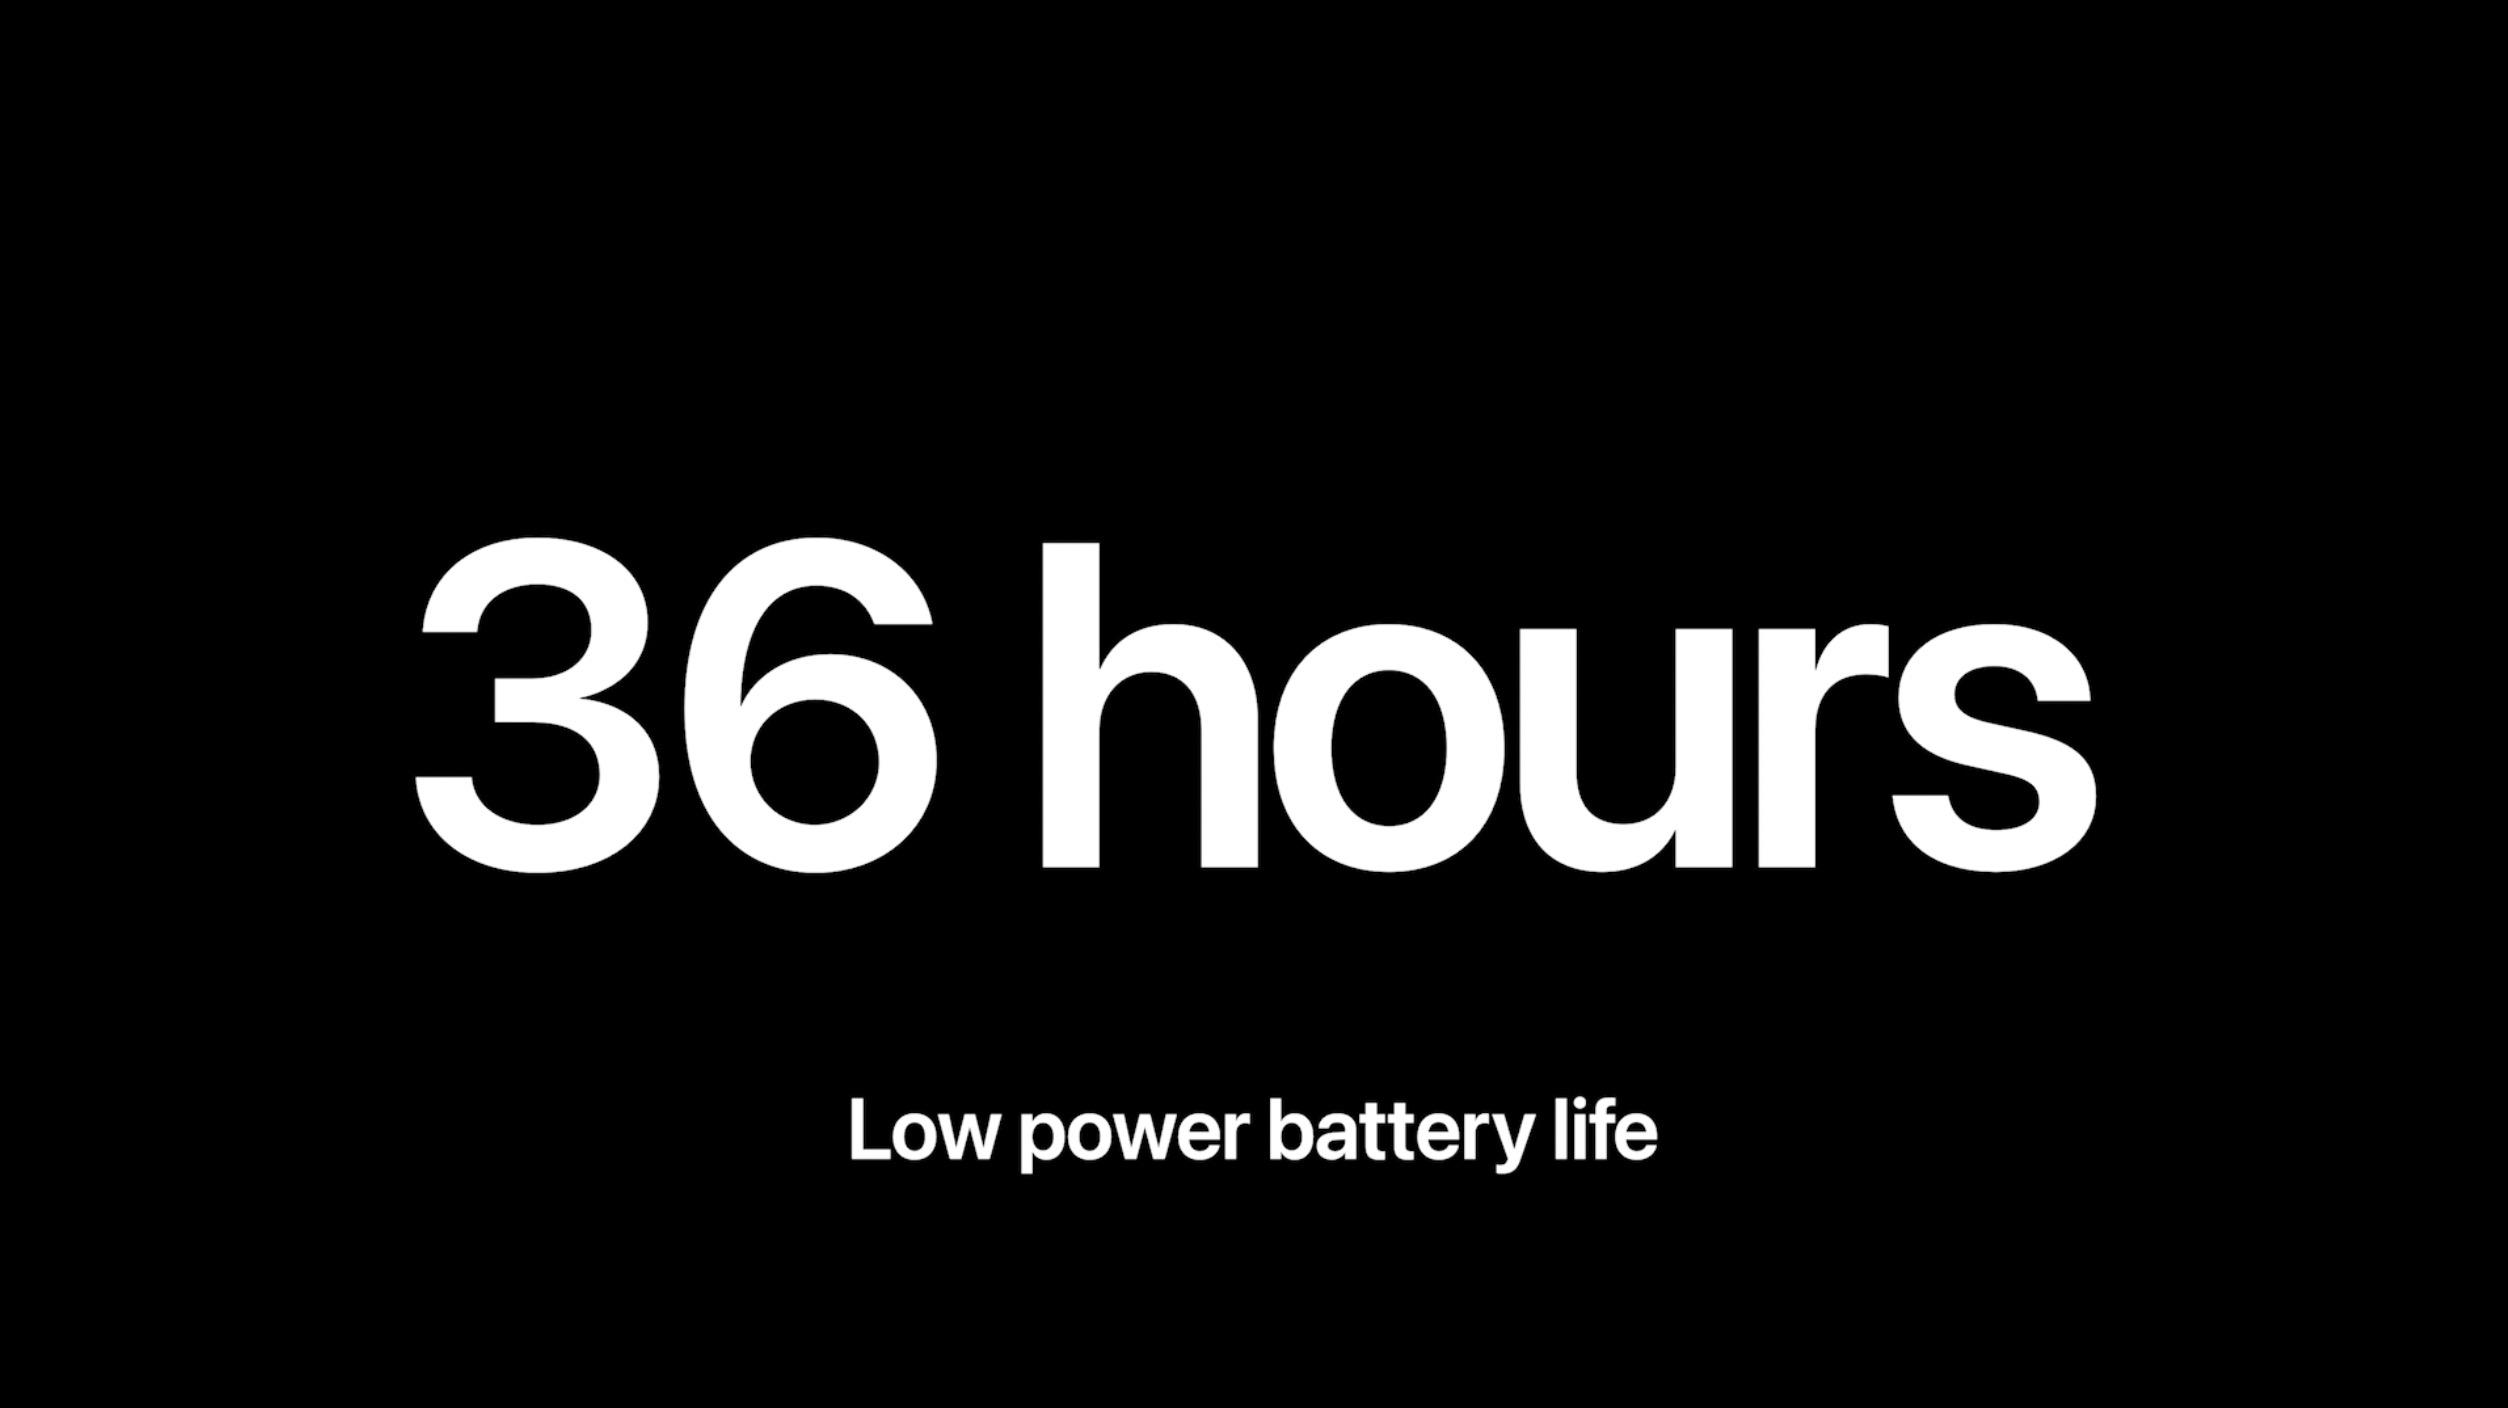 Apple Watch Series 8 to Series 4 battery life extended with Low Power mode